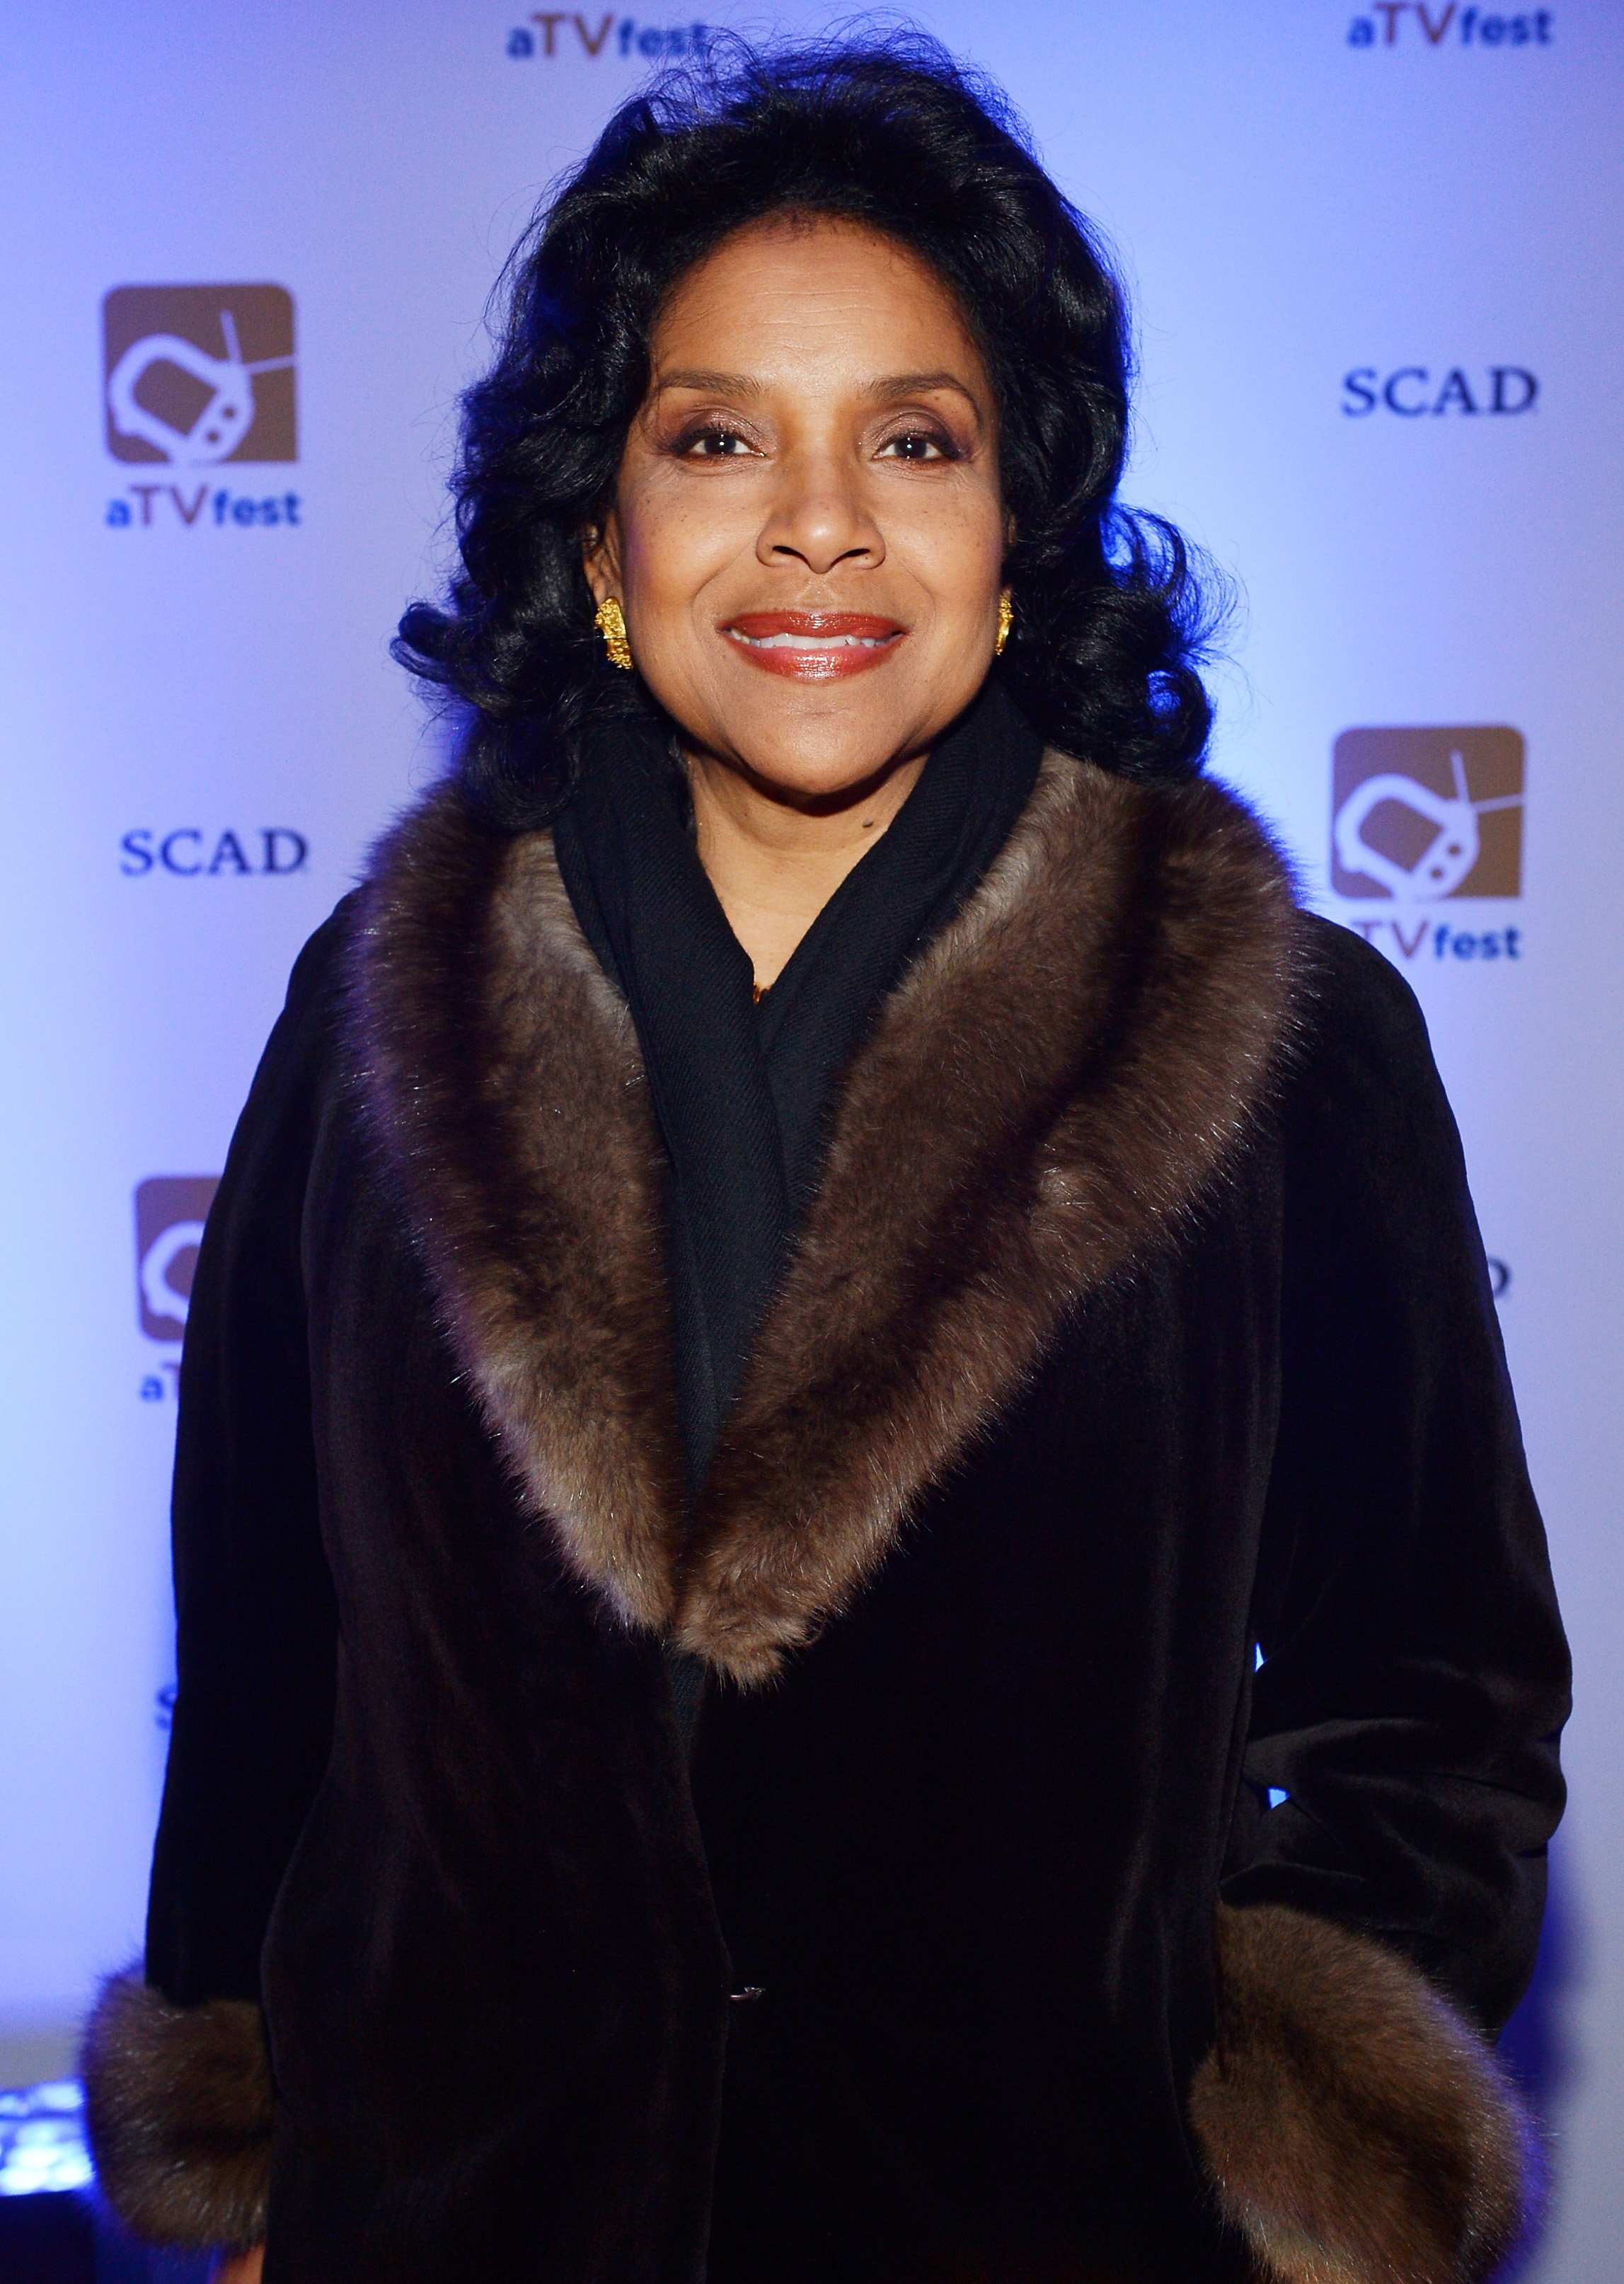 Actor Phylicia Rashad honored during the Inaugural aTVfest presented by (SCAD) Savannah College of Art and Design on February 16, 2013. | Photo: Getty Images